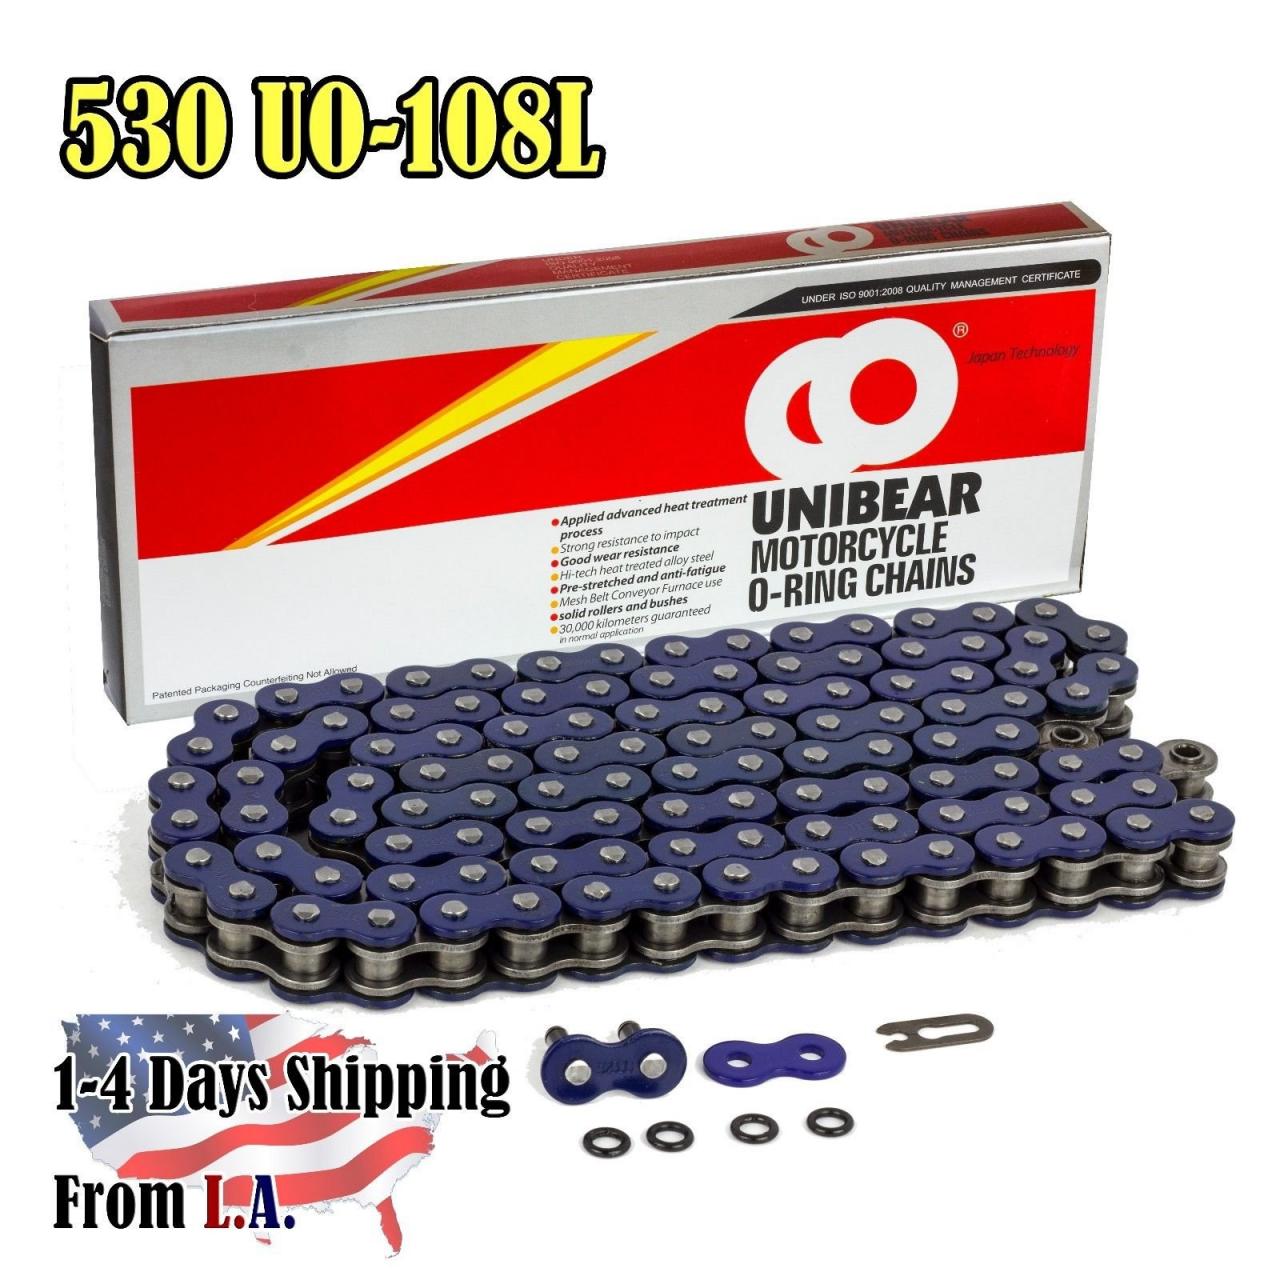 Buy Unibear O-Ring 530 108 Links Motorcycle Chain, With 1 Connecting Link,  Blue, Japan Technology in Cheap Price on Alibaba.com